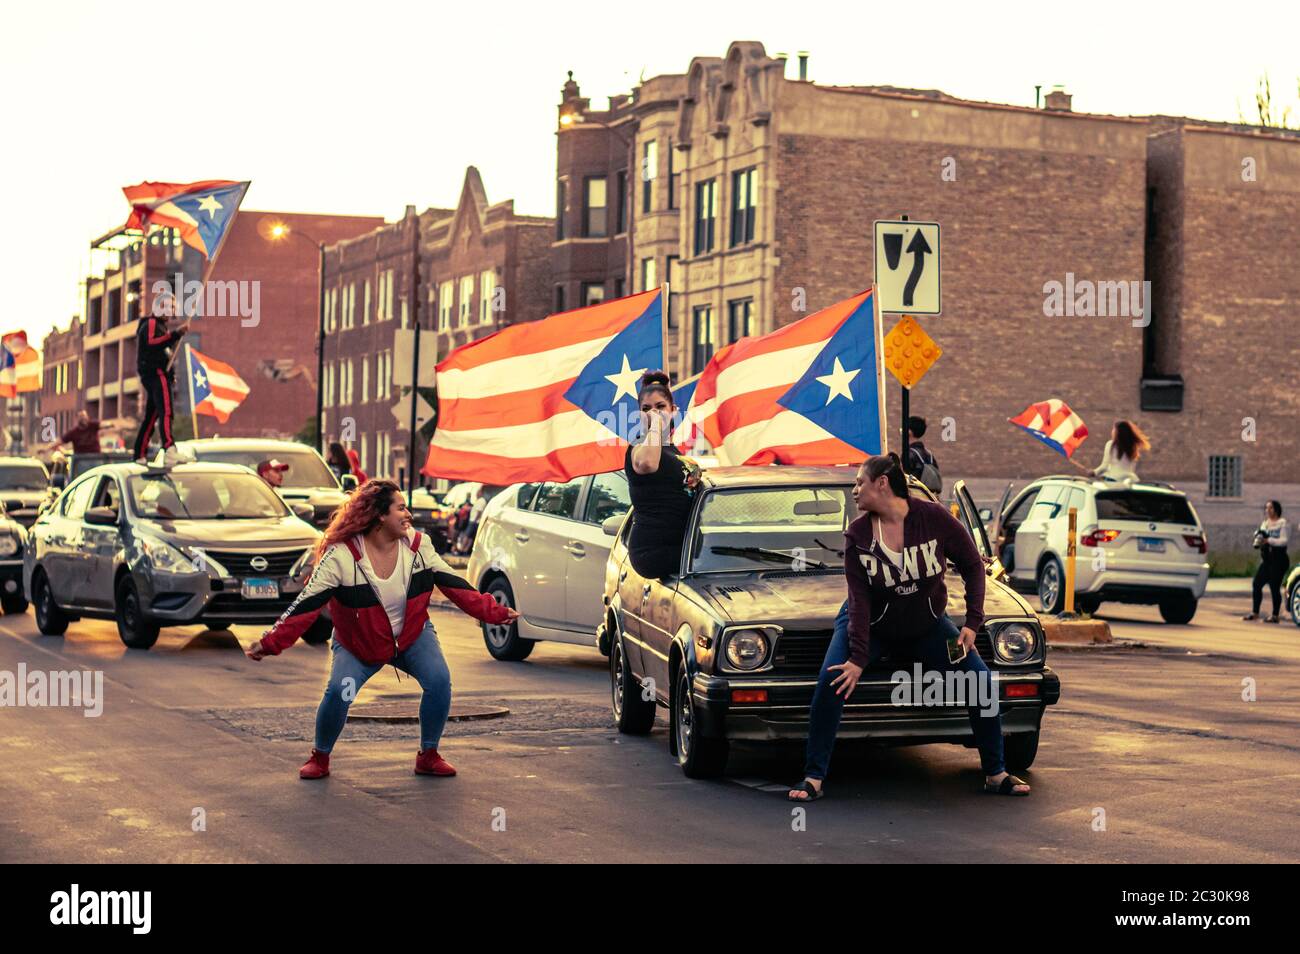 Chicago, USA-June 14, 2020: Hundreds of cars form a caravan in the Humboldt Park neighborhood to express Puerto Rican pride Stock Photo